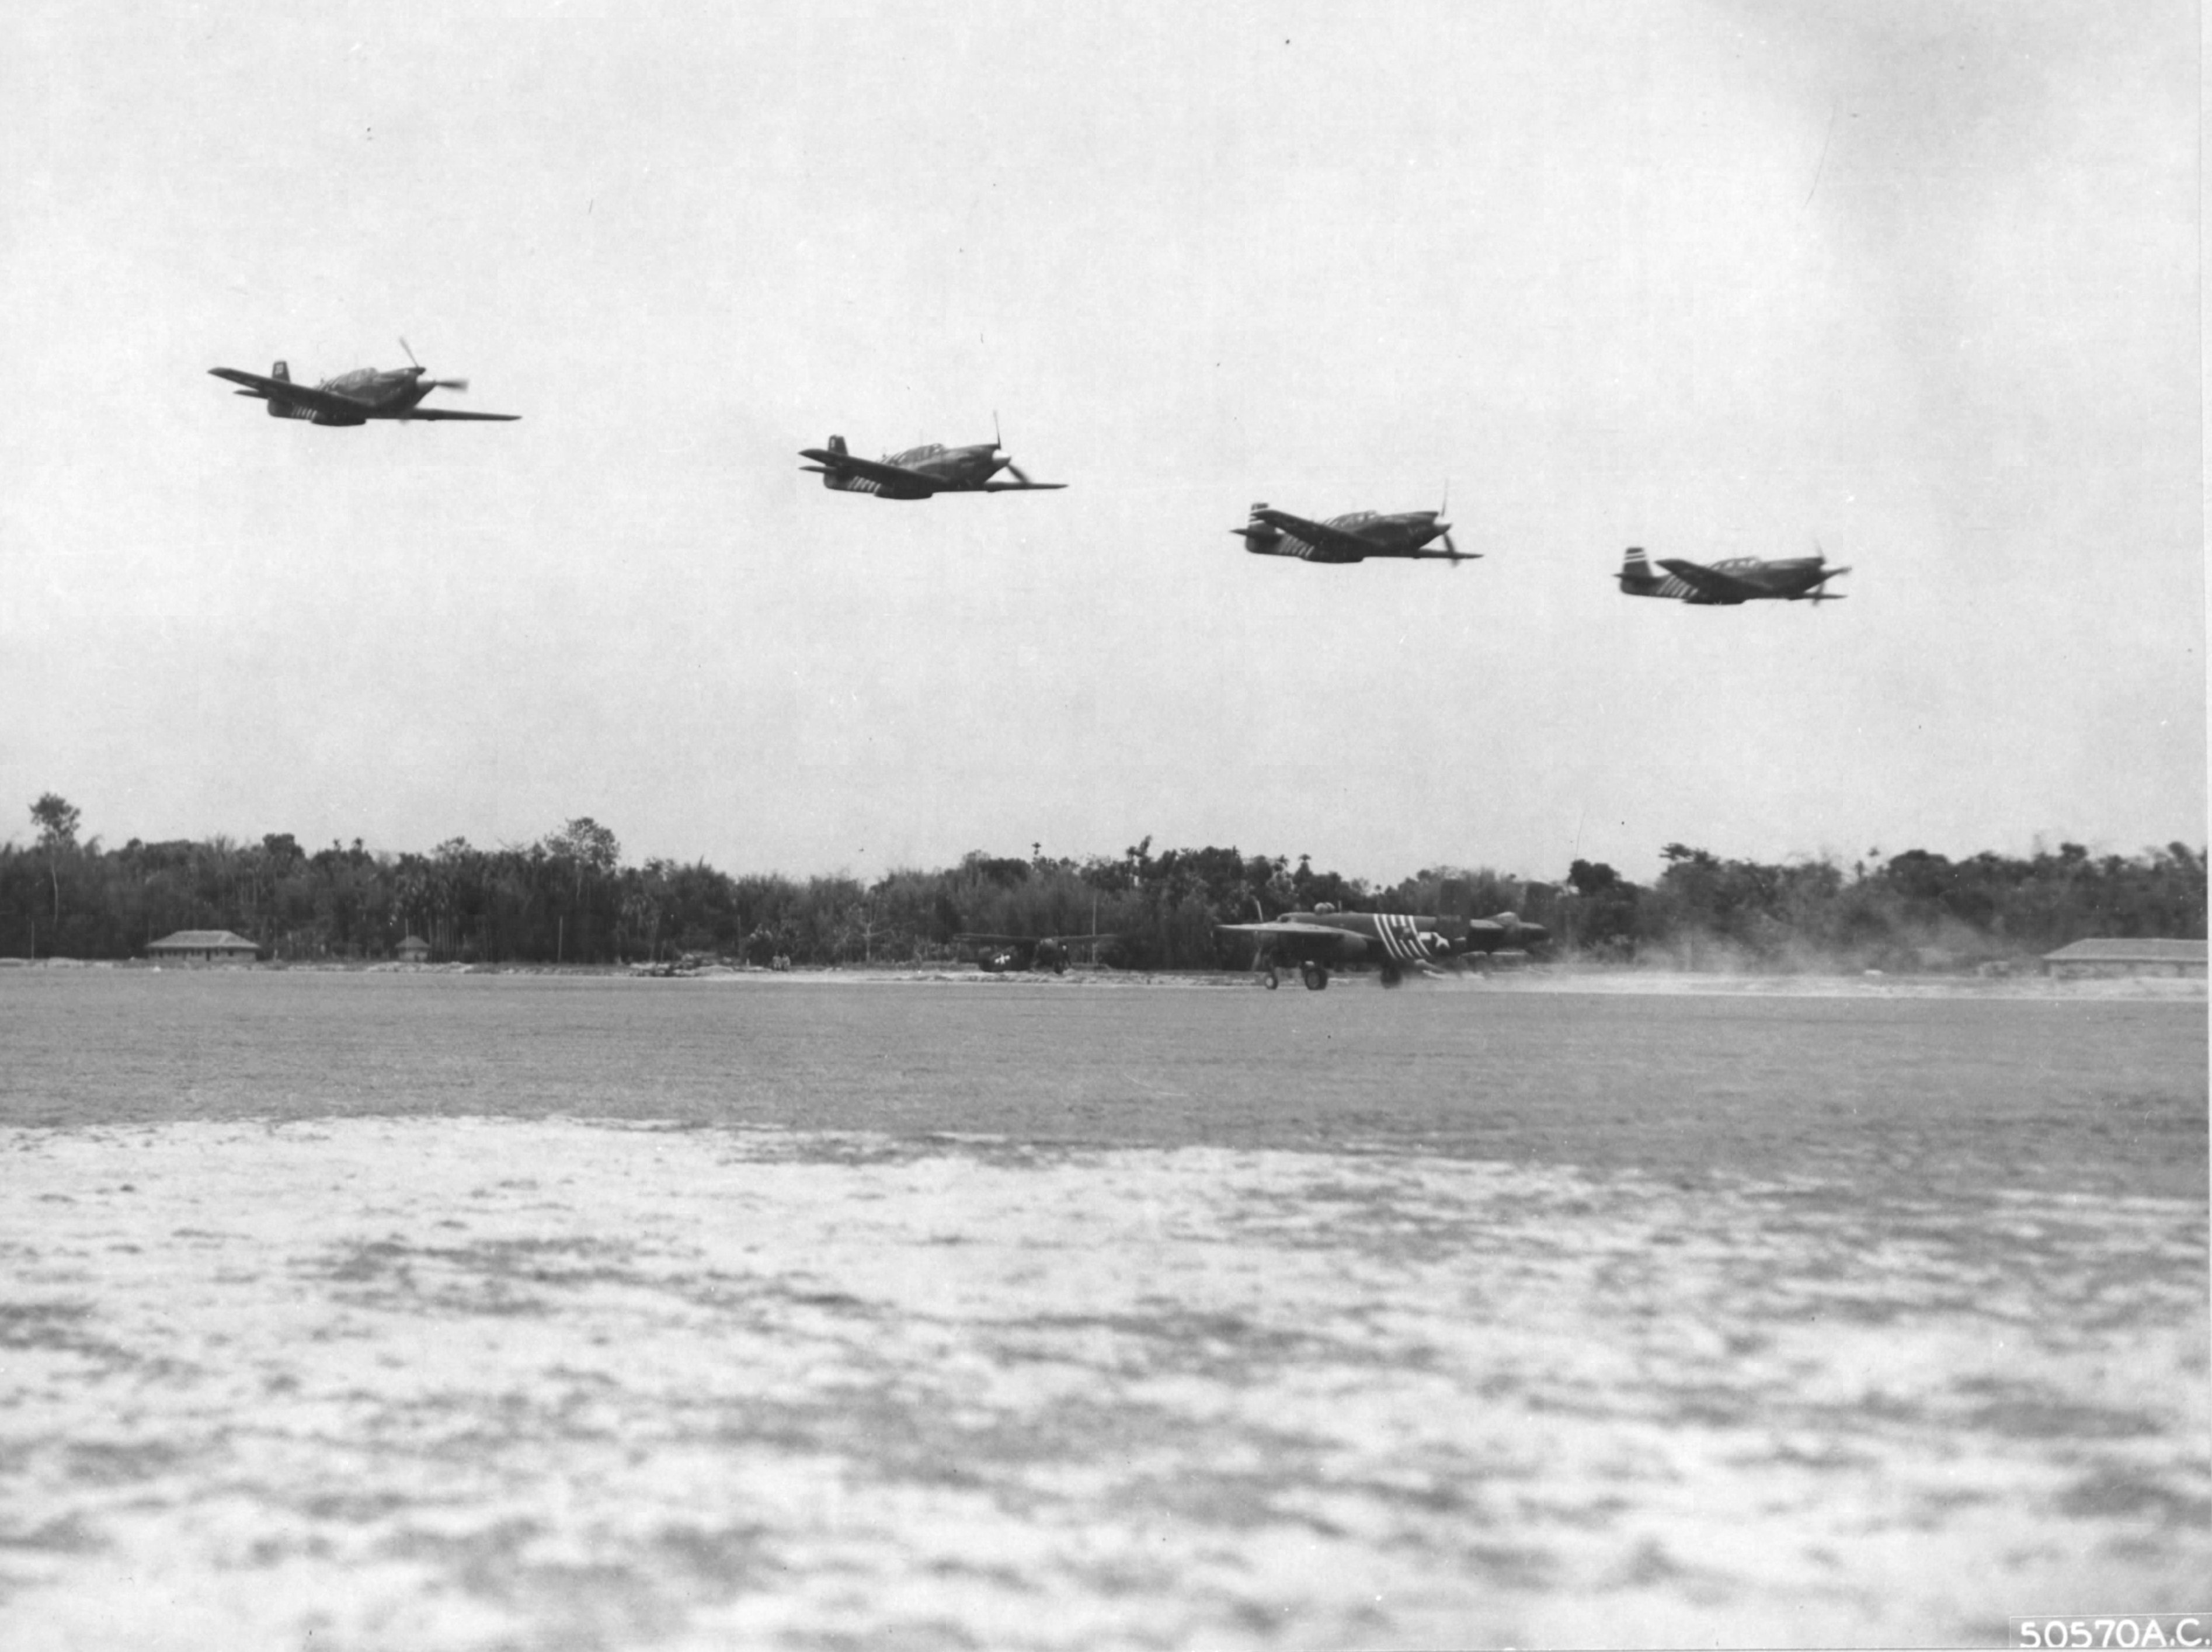 P-51A Mustangs do a low pass over a forward air field of the 1st Air Commandos, Burma, Apr 1944. Note also a B-25H Mitchell and an L-1 Vigilant